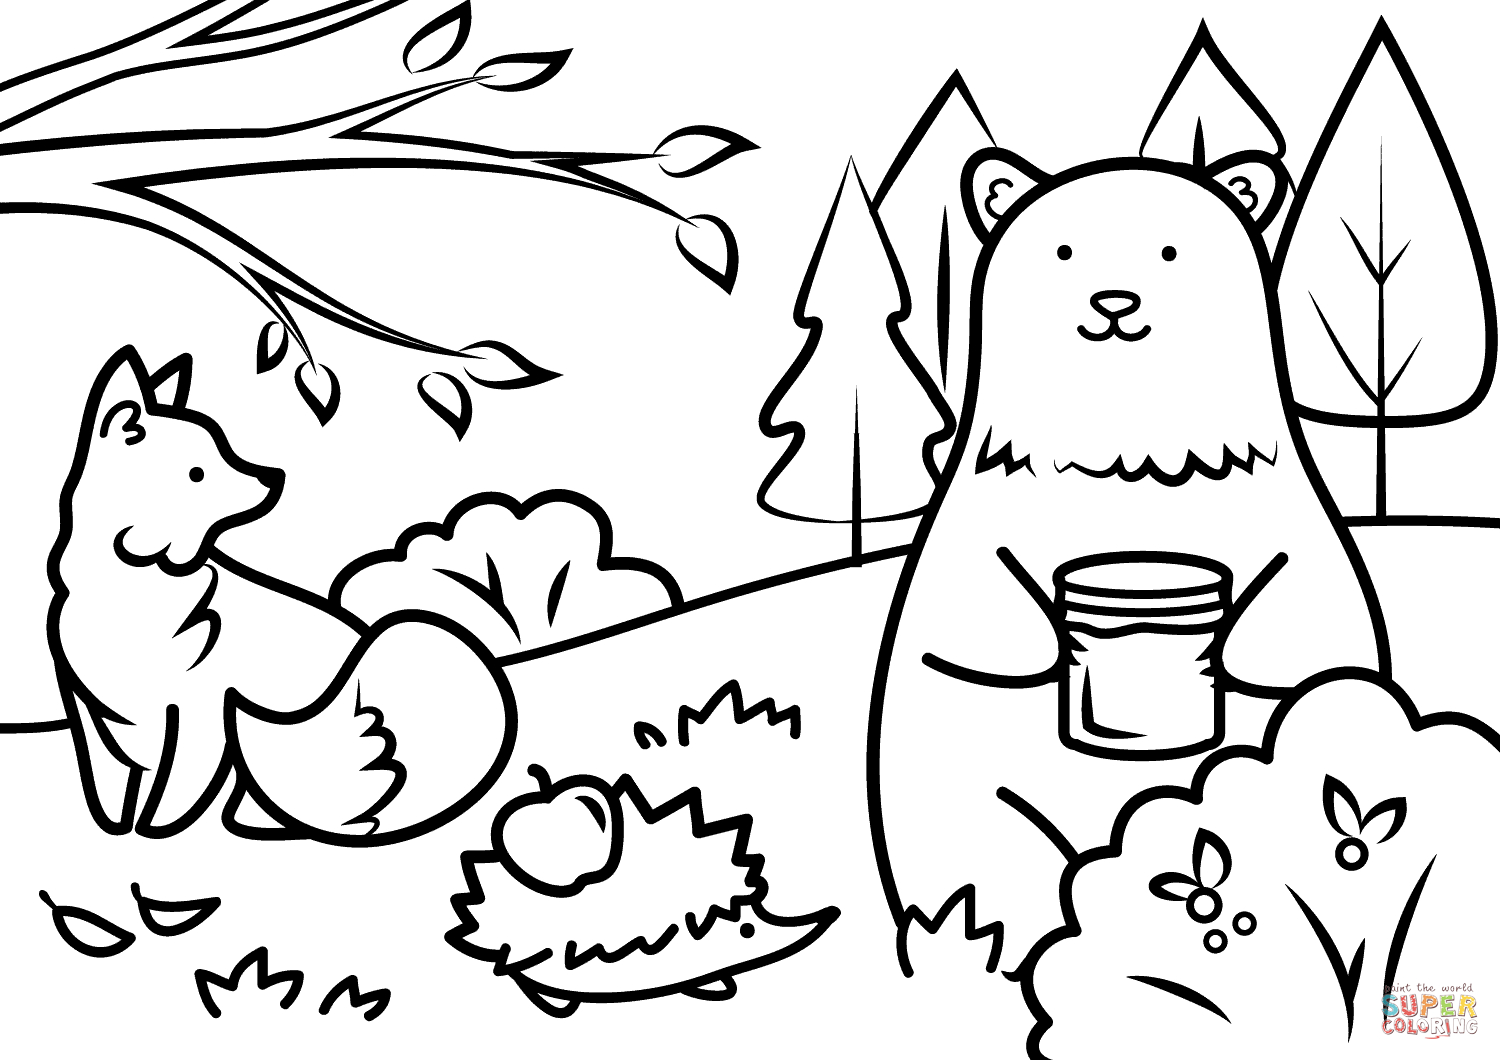 Autumn Animals Coloring Page | Free Printable Coloring Pages - Free Coloring Pages Animals Printable